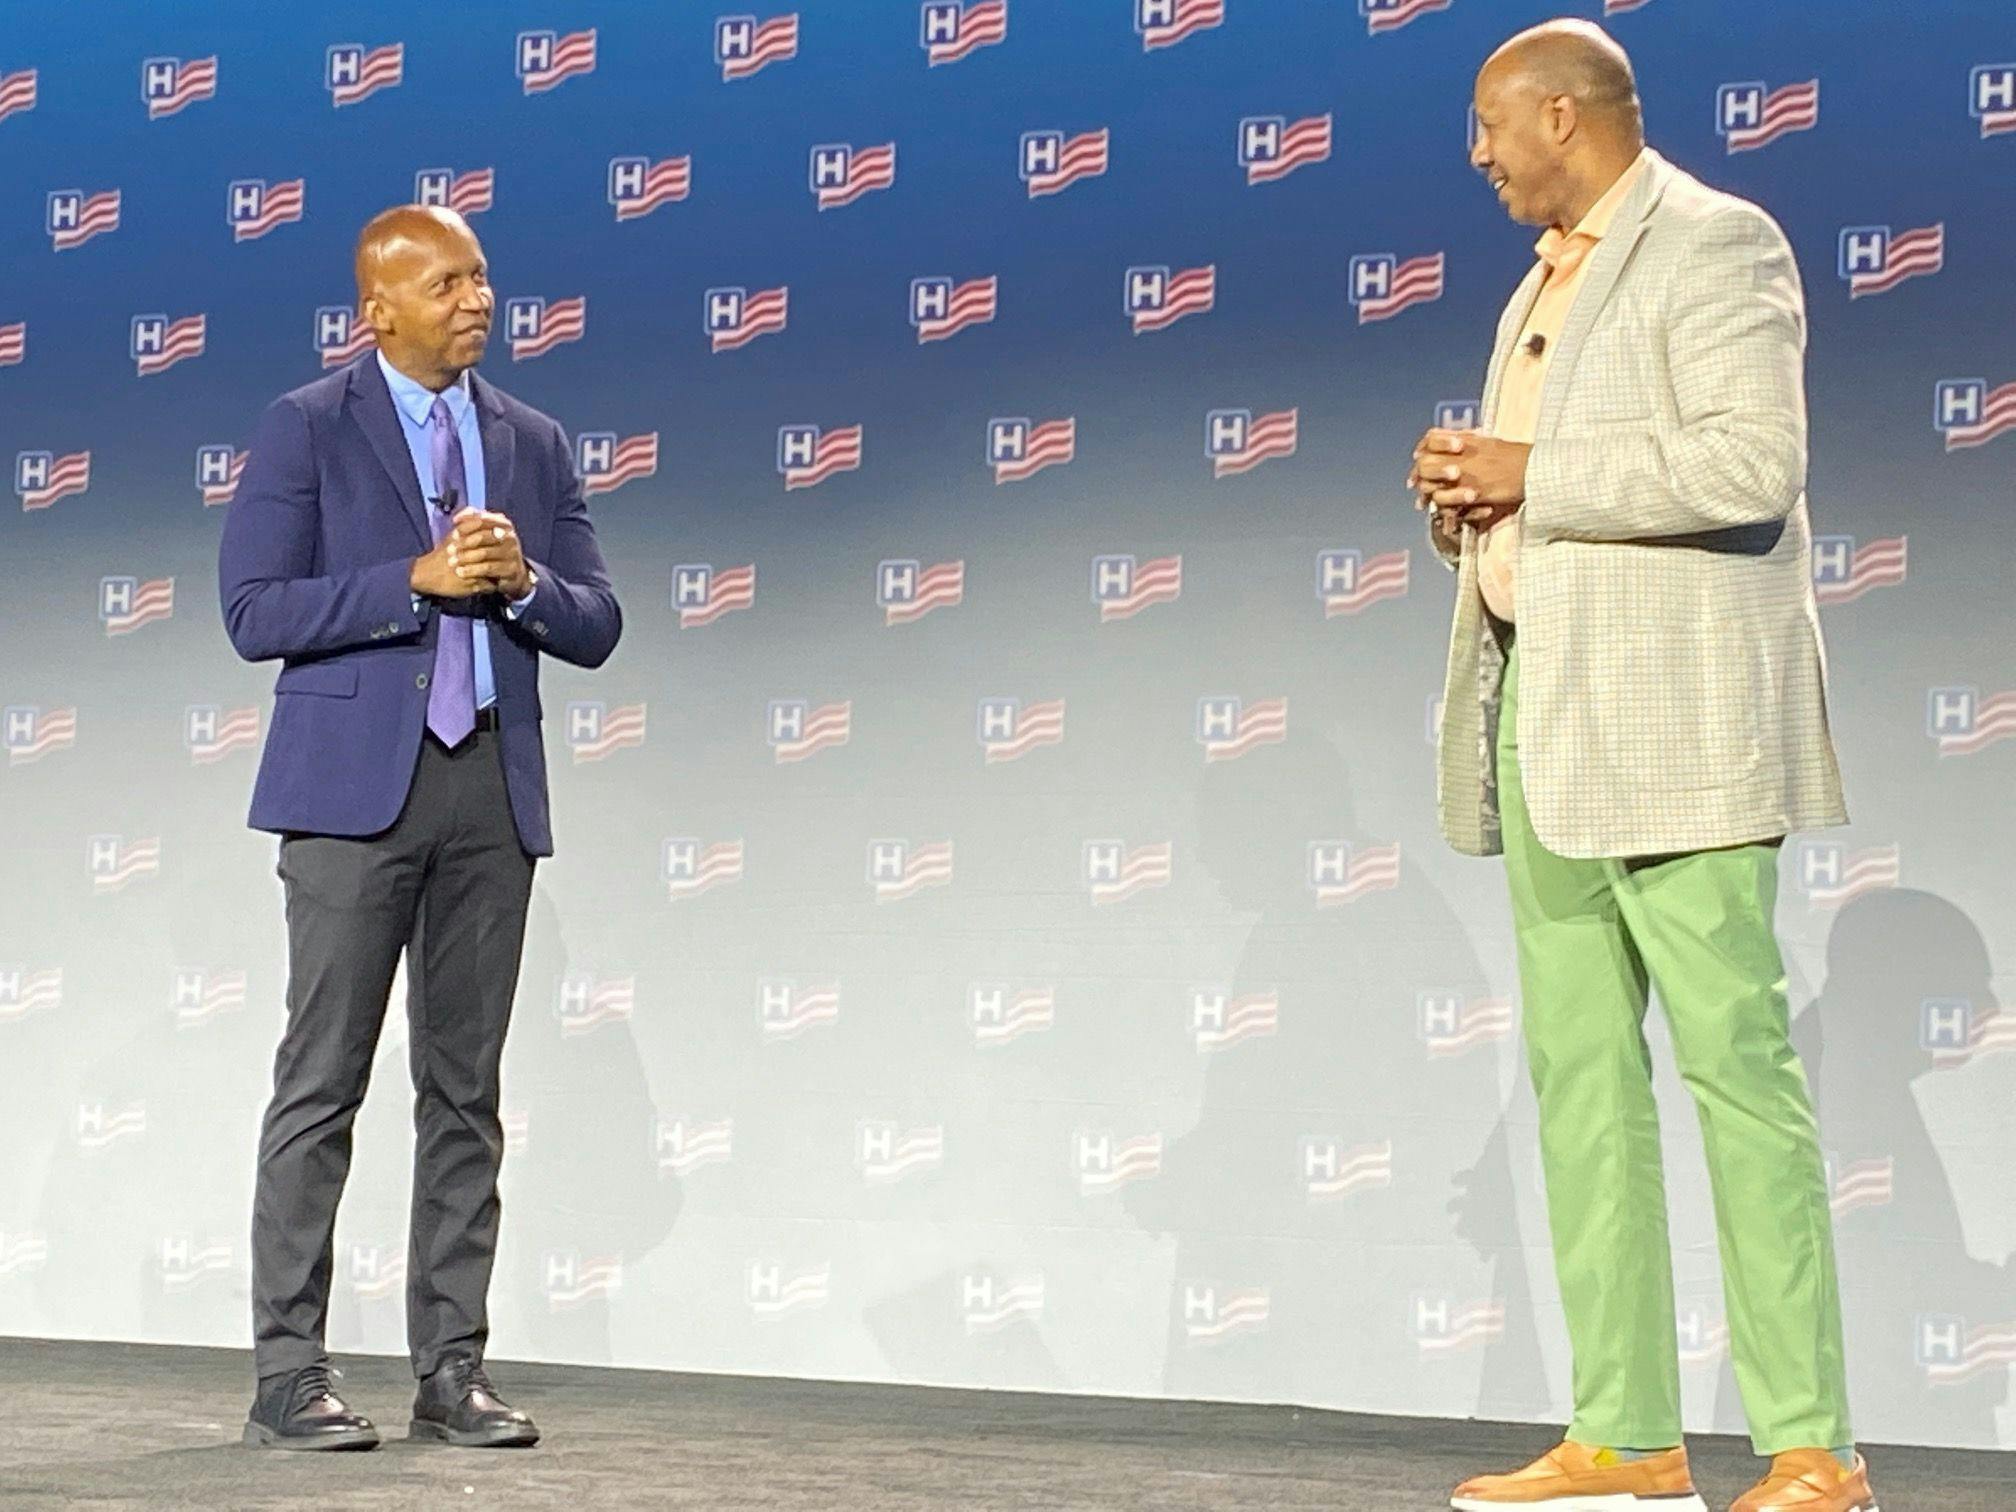 Bryan Stevenson, left, a lawyer and social justice activist, talked about health equity at the American Hospital Association's Leadership Summit in San Diego Sunday. Wright Lassiter, CEO of the Henry Ford System and chairman of the AHA's Board of Trustees, said the health system must do better.